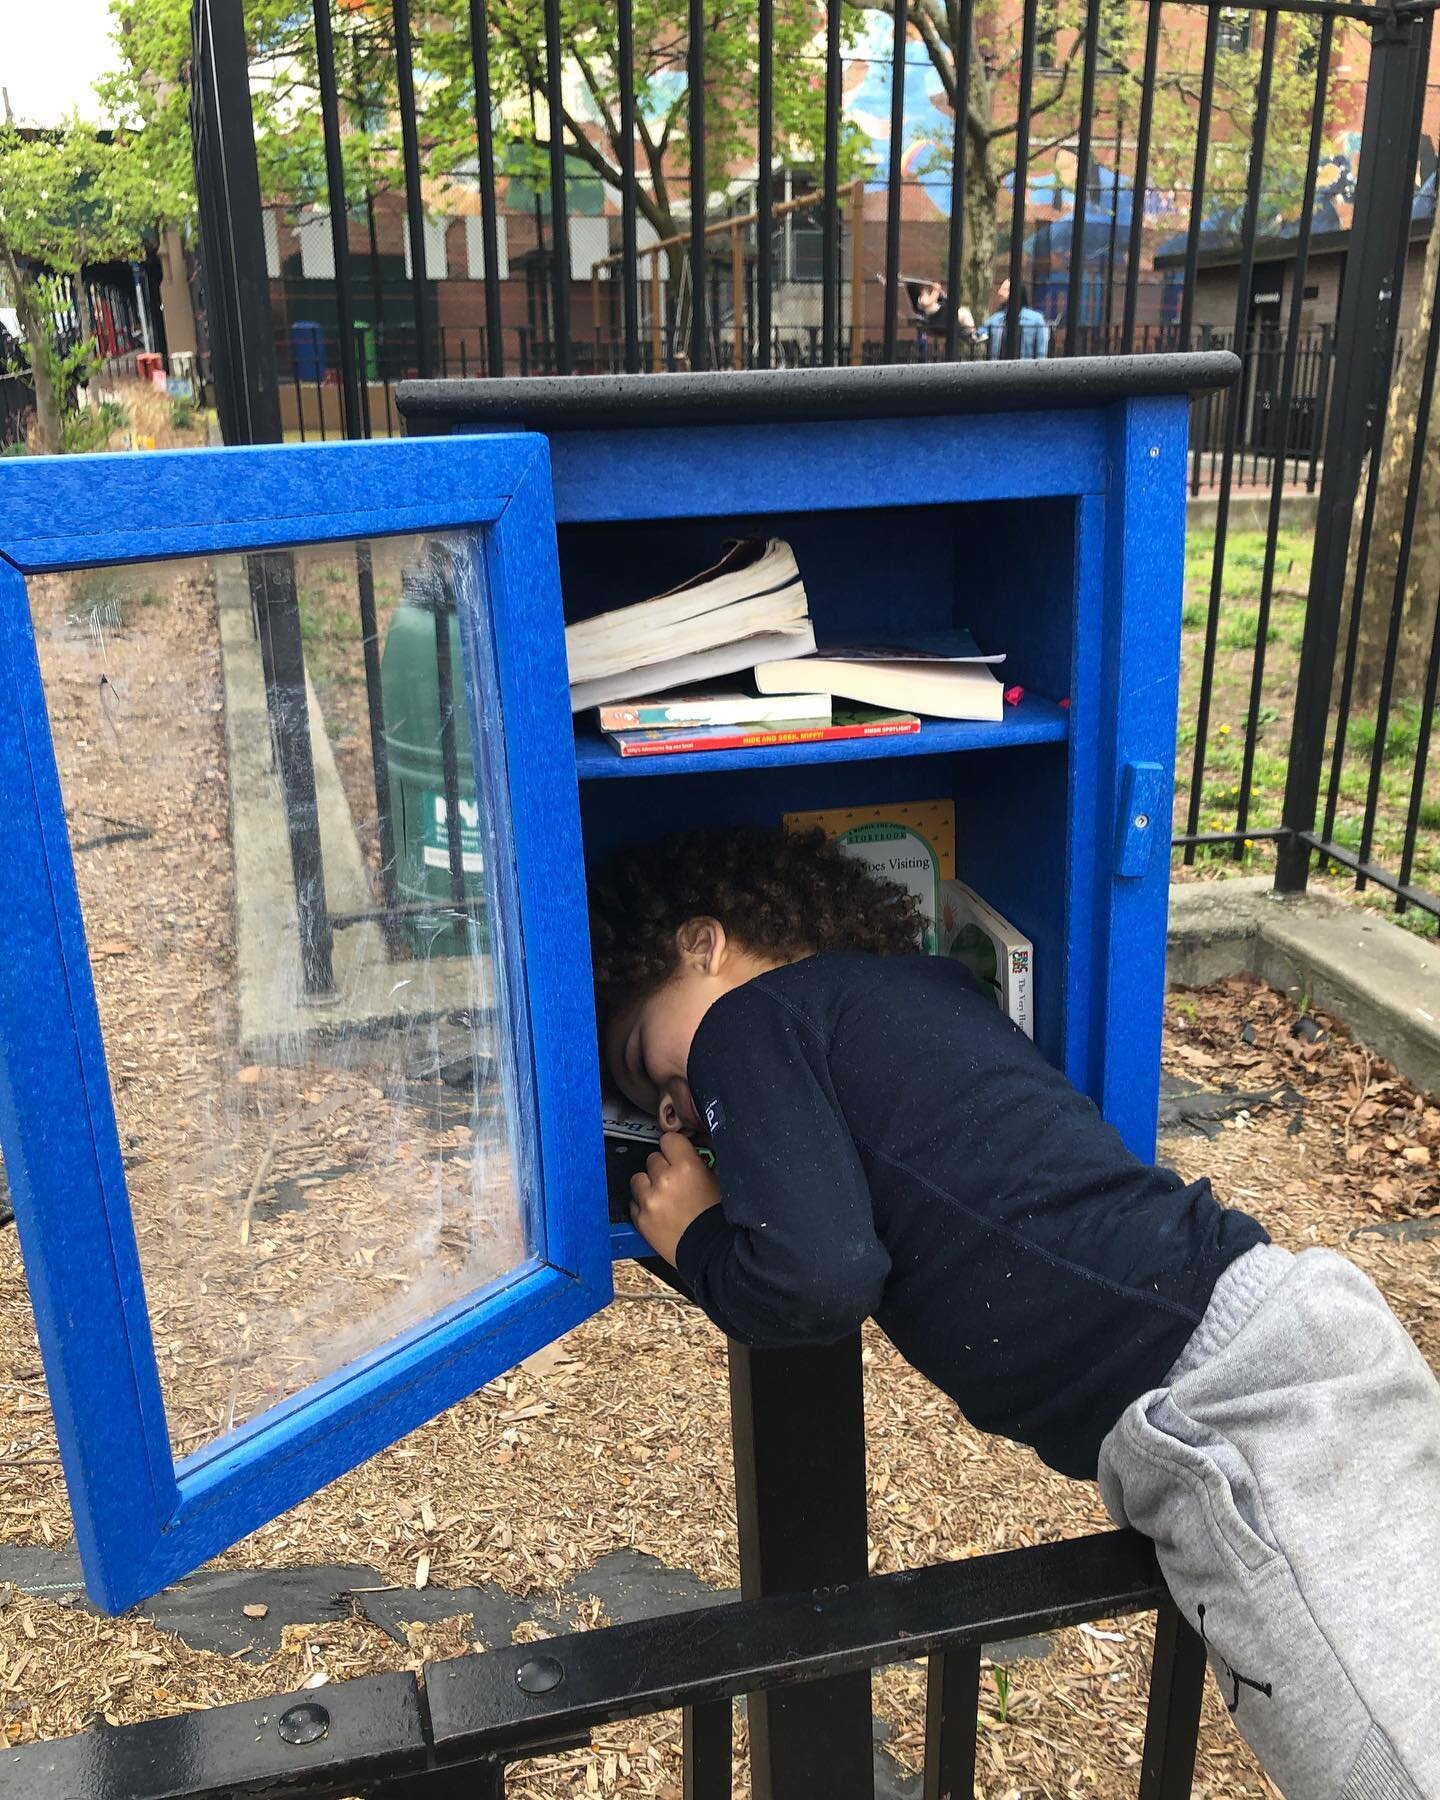 BAA kiddos are always interacting with public space in unexpected ways. @littlefreelibrary #littlefreelibrary  pic number two is a 3 page story board, movie making culture is getting stronger now that we have some good working gear and some trained e